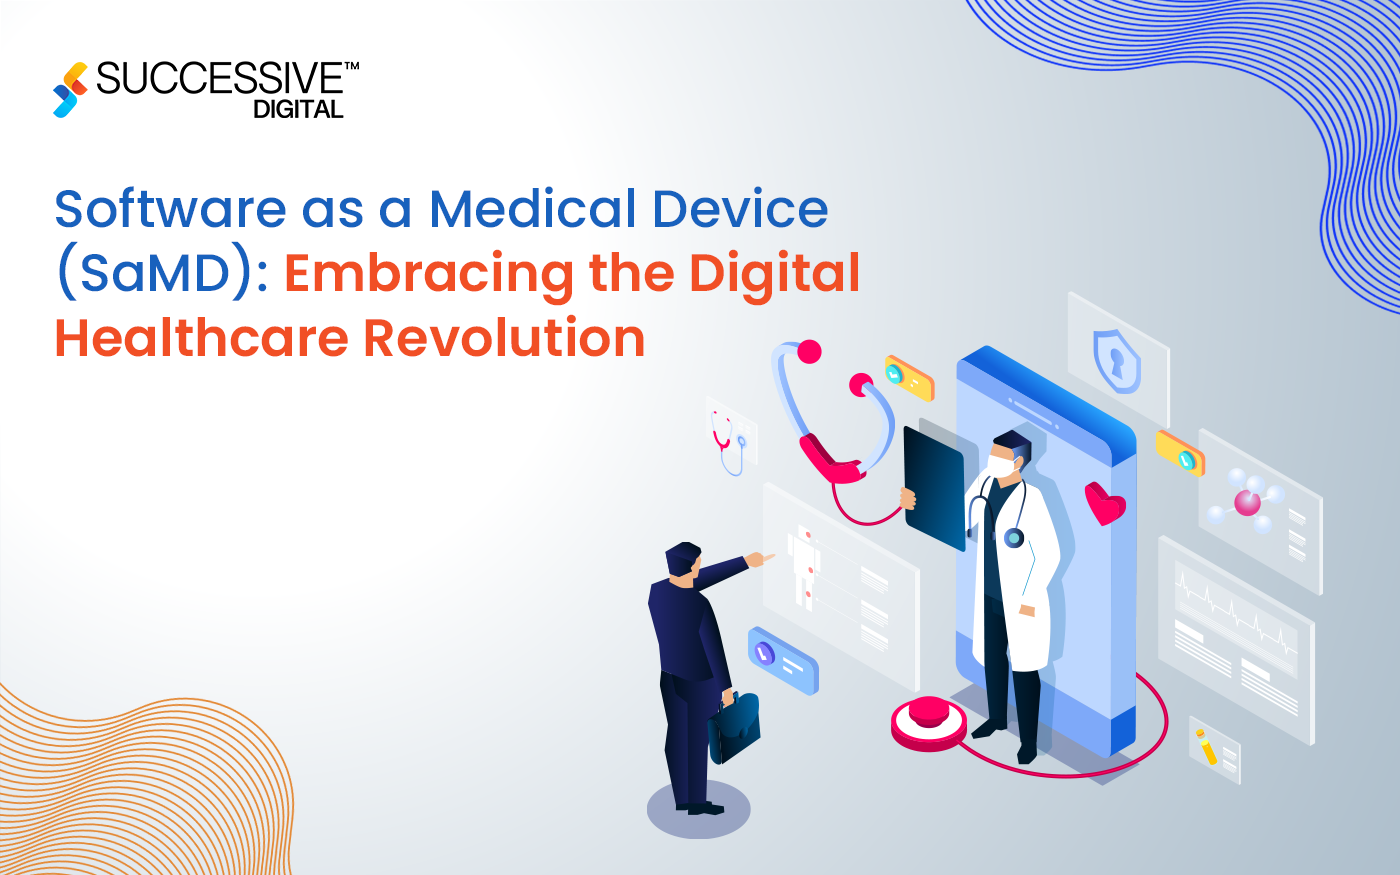 Software as a Medical Device (SaMD): Embracing the Digital Healthcare Revolution